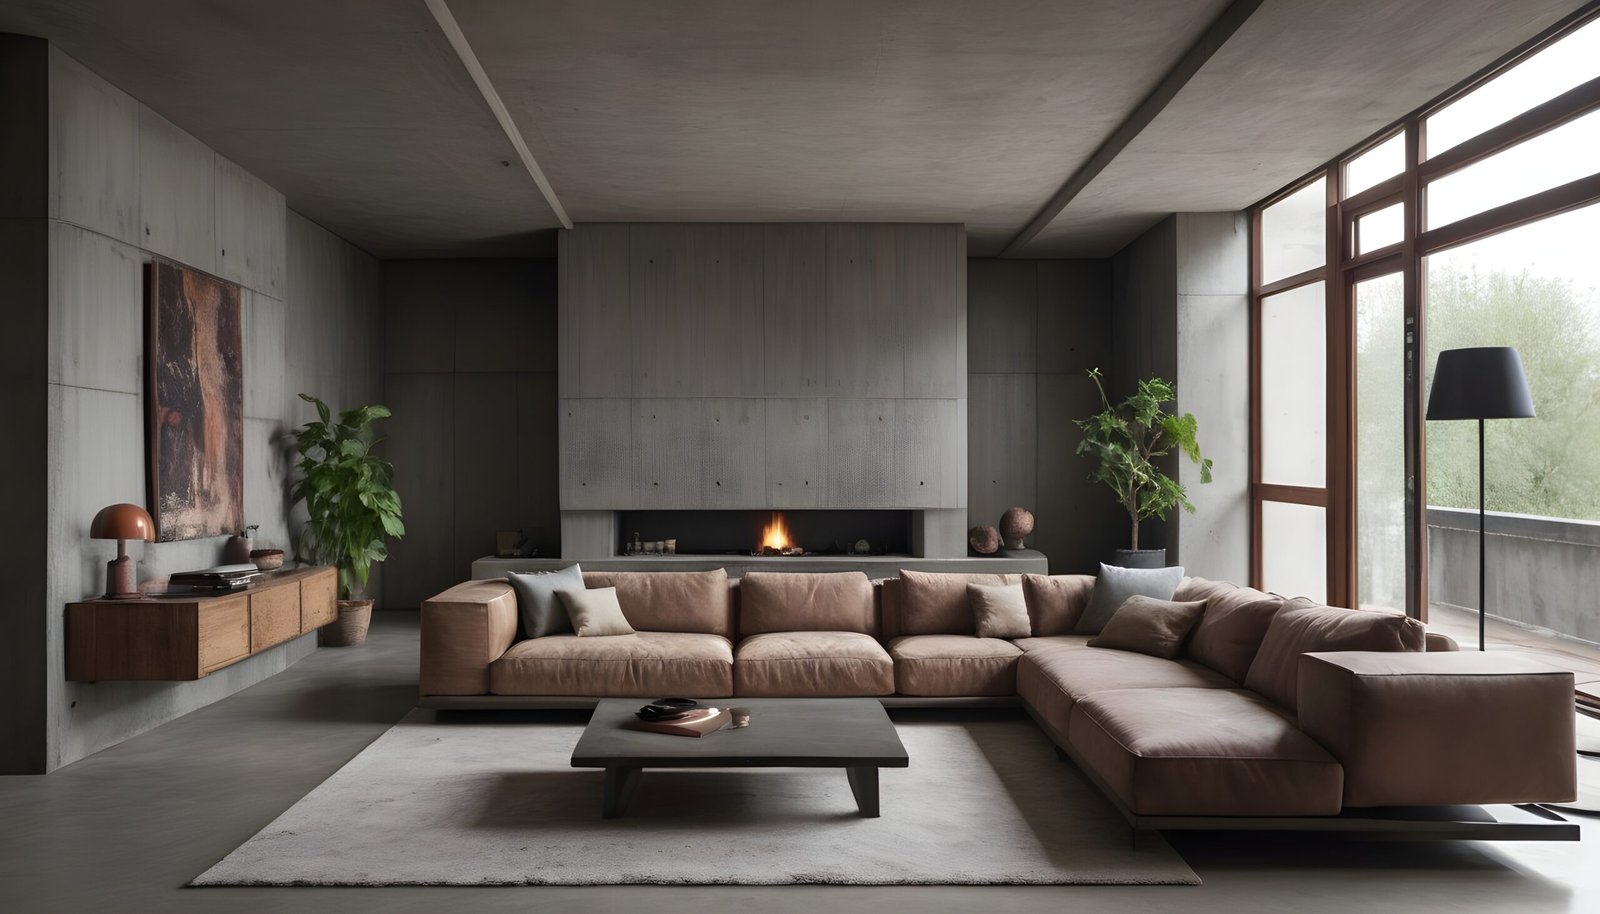 Brutalist interior living room with concrete walls and a fireplace.